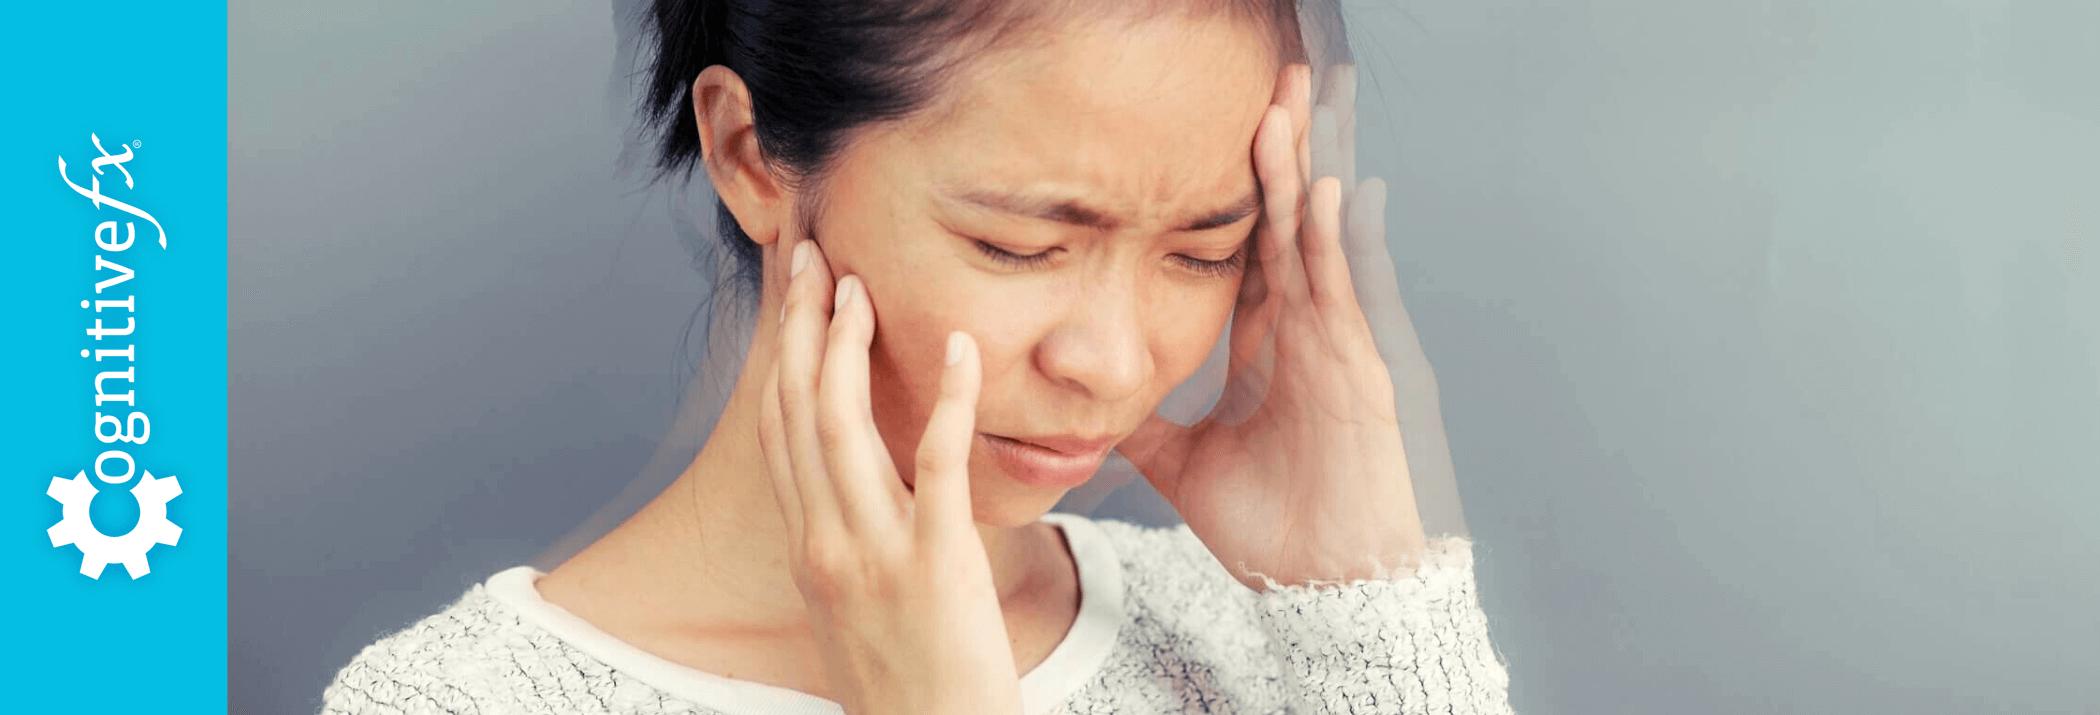 Post-Concussion Syndrome Dizziness: Causes & Treatment